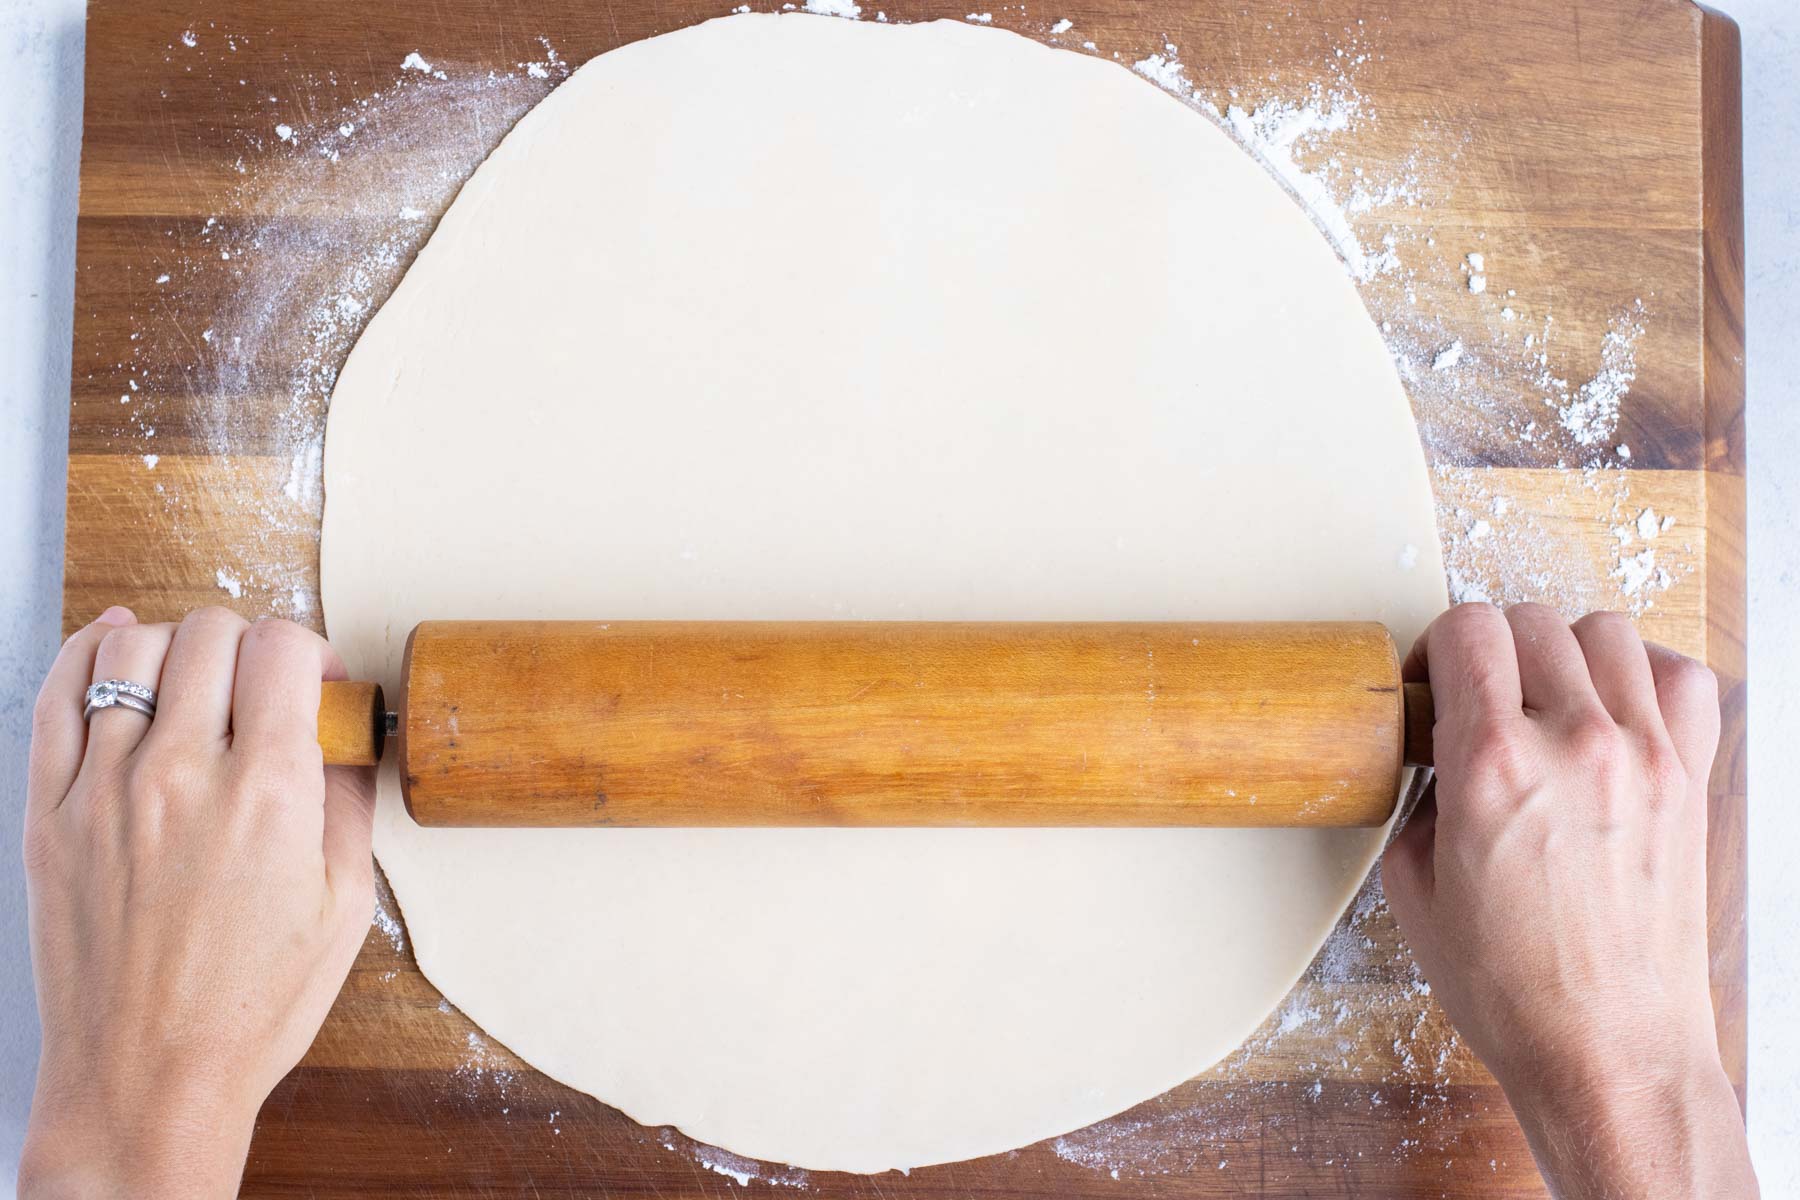 Pie crust is rolled out flat.